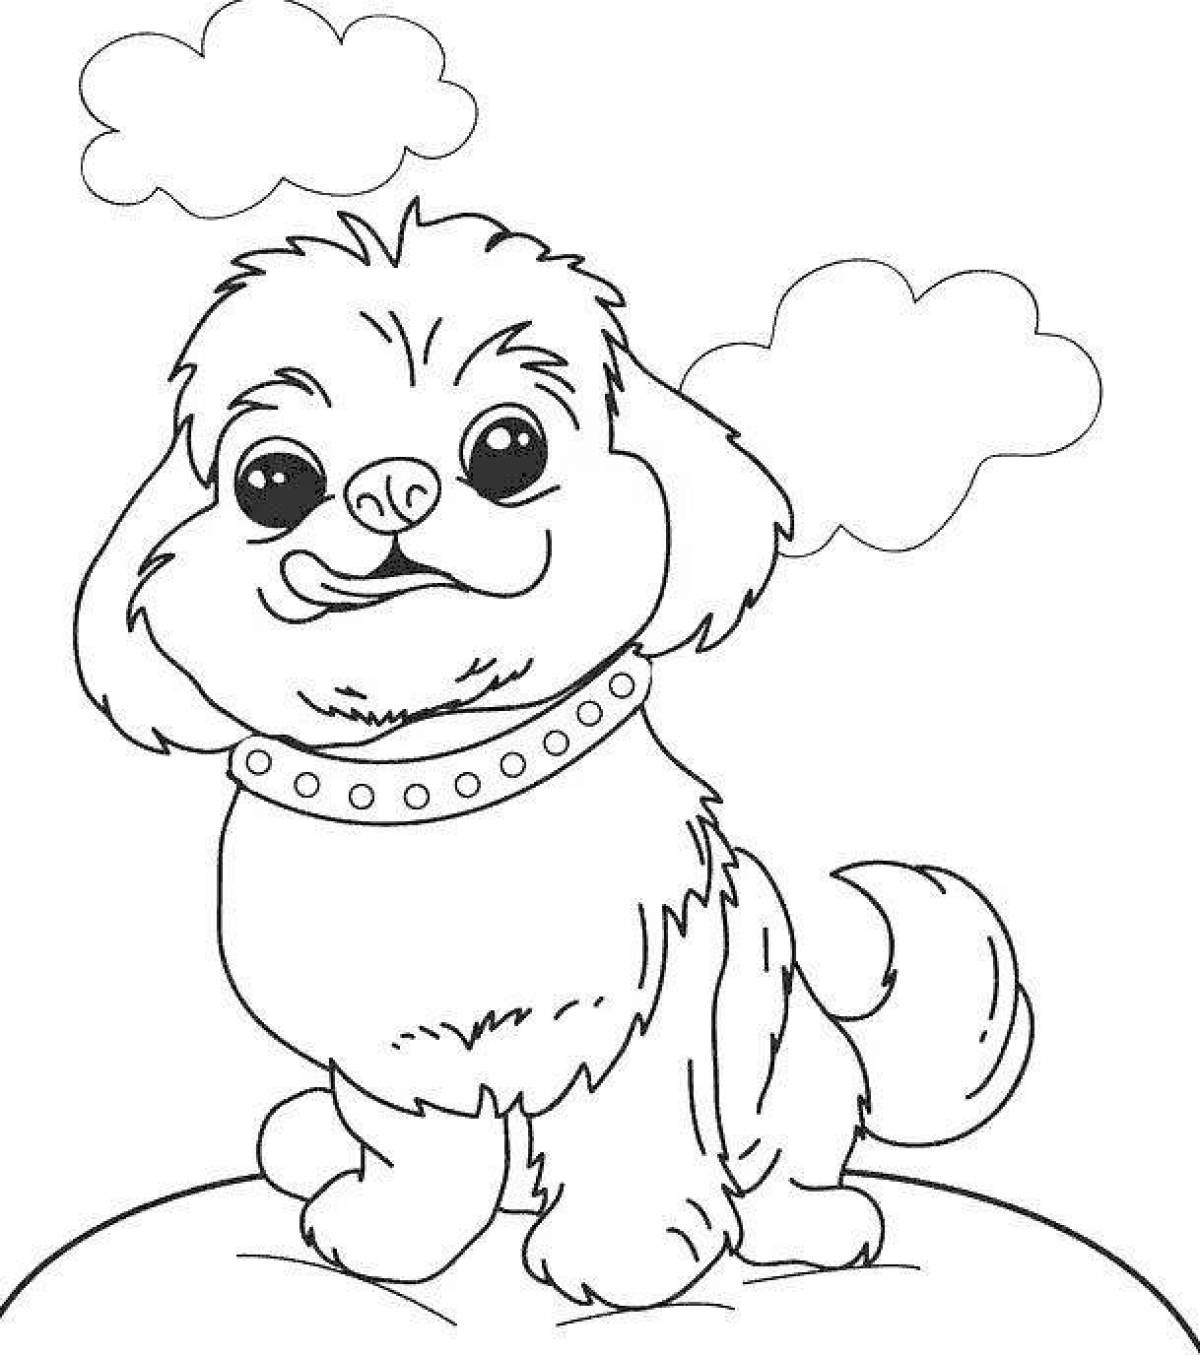 Animated dog coloring page